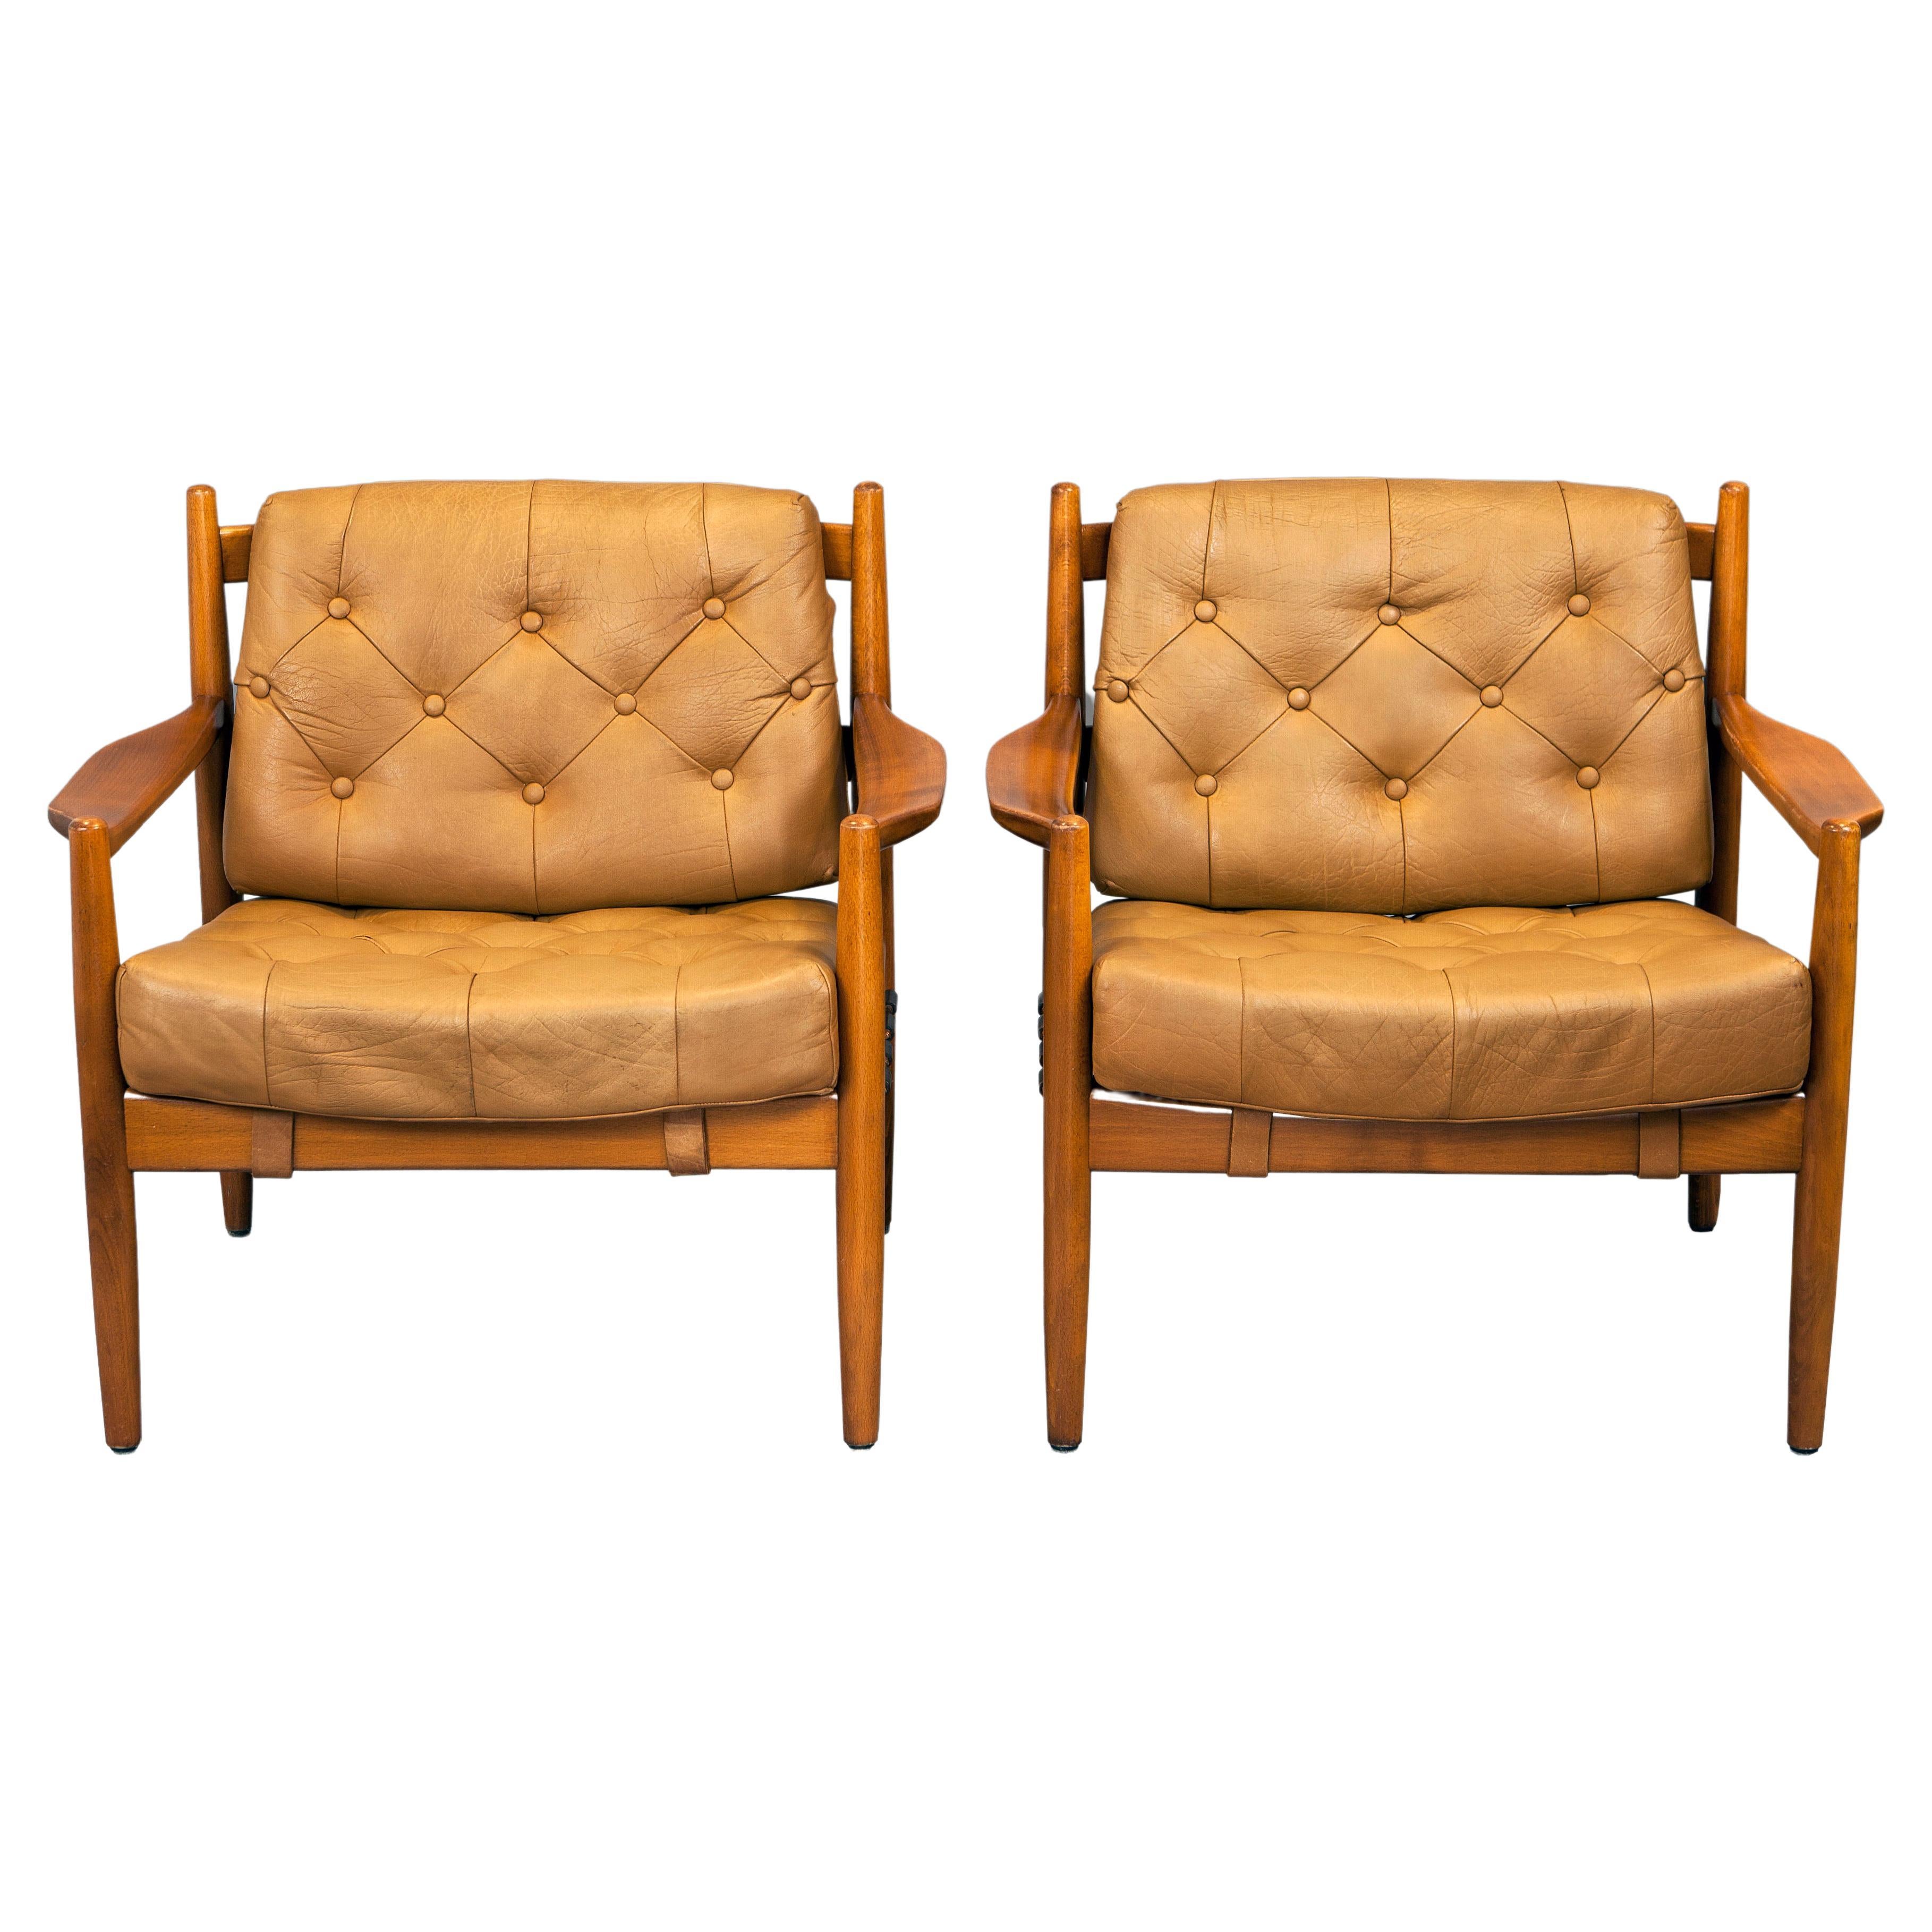 1960s Ingemar Thillmark “Läckö” Pair of Armchairs in Stained Beech and Leather For Sale